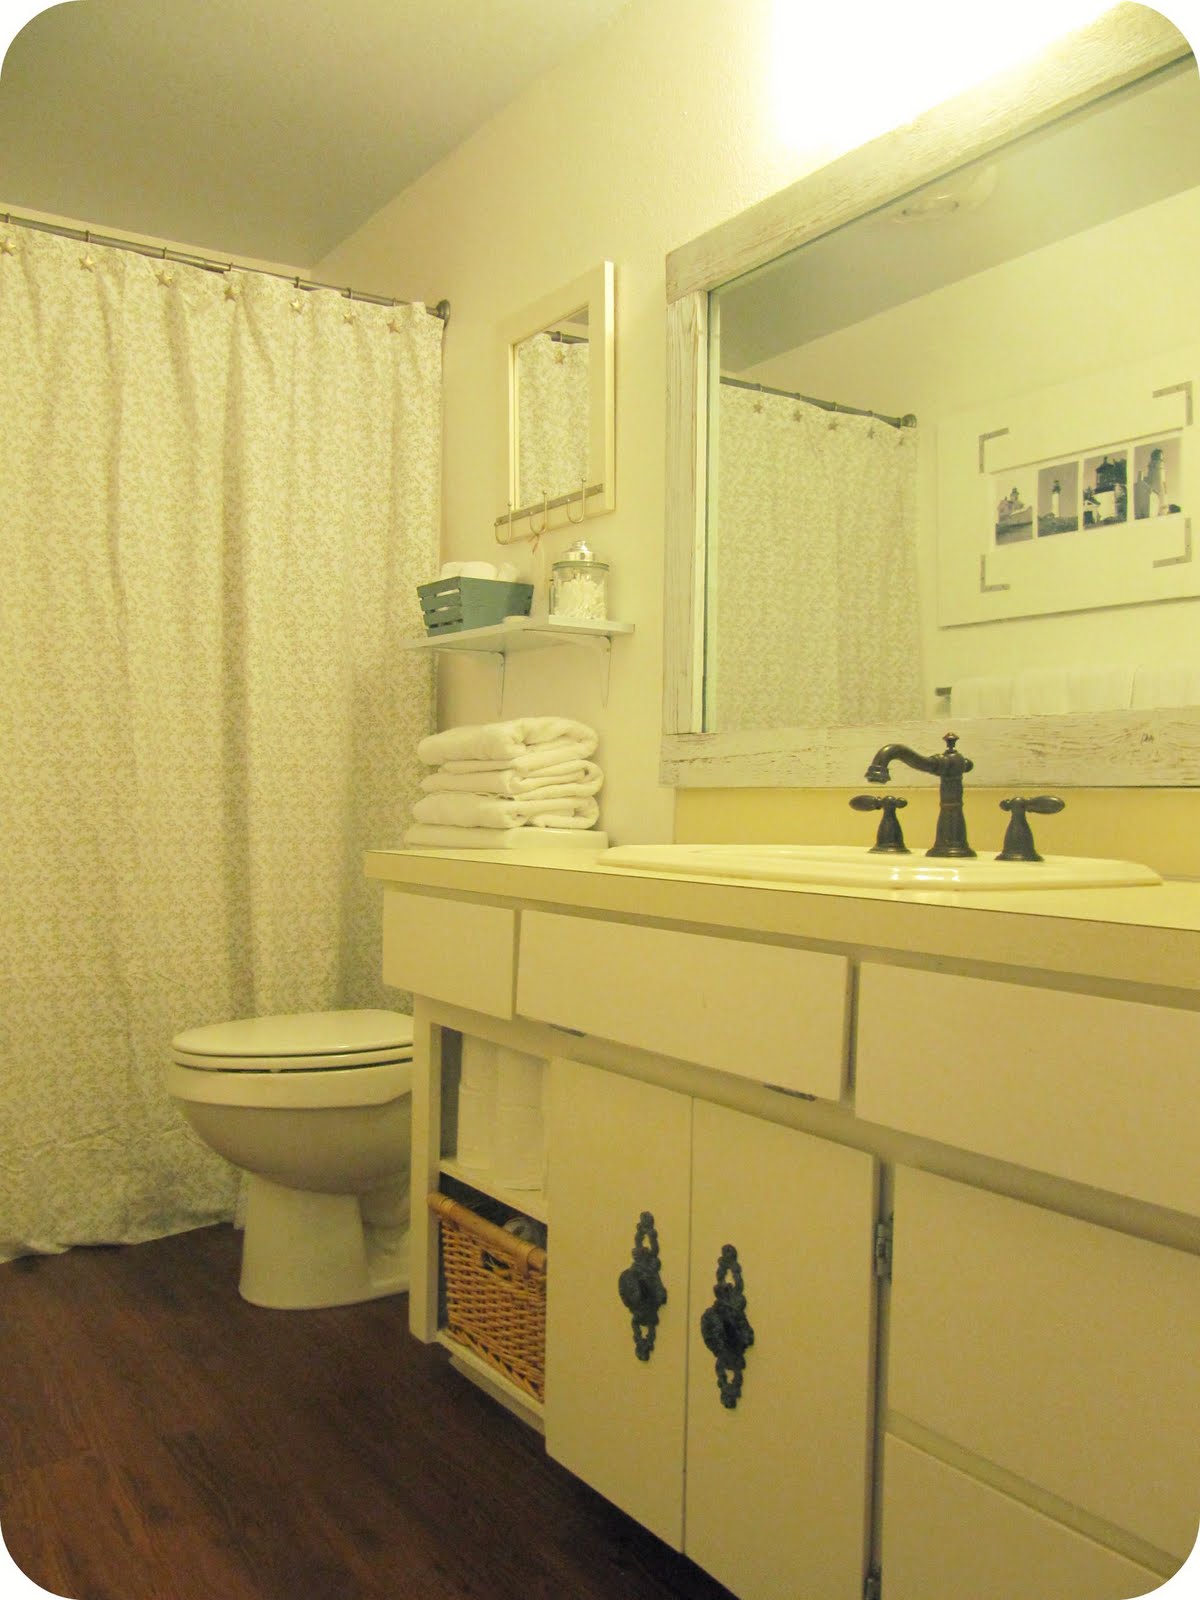 A few small changes in the Bathroom